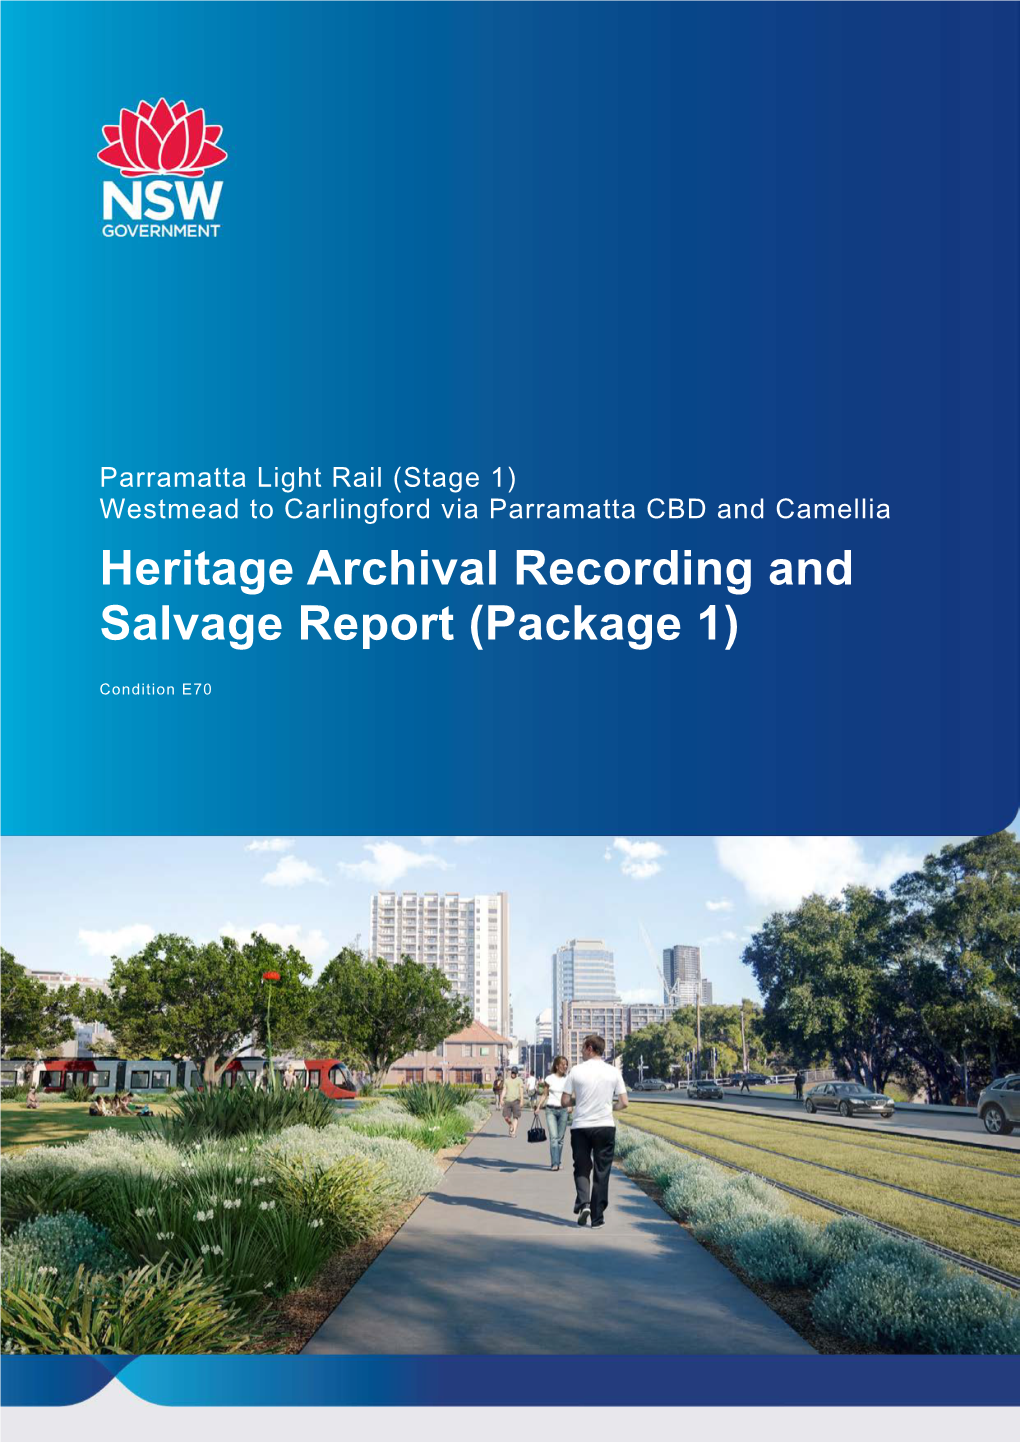 Heritage Archival Recording and Salvage Report (Package 1)